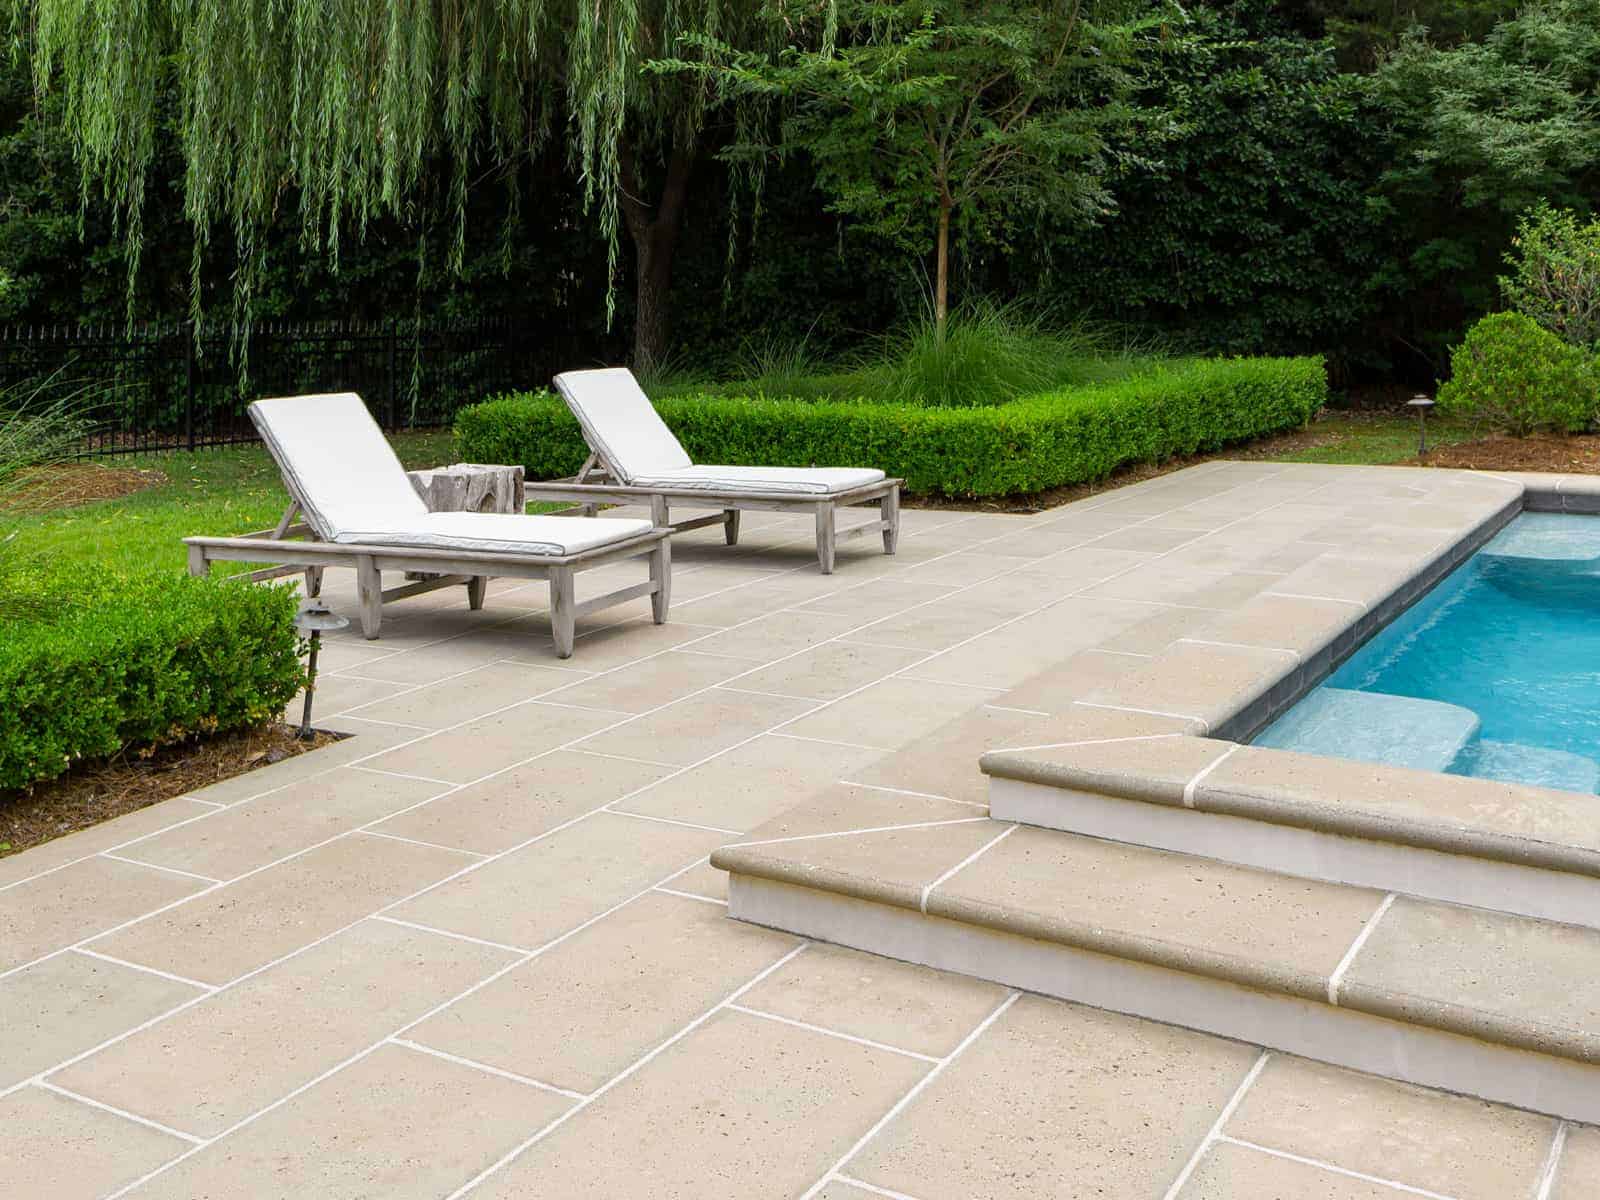 Concrete pavers in Peacock Pavers’ Buff color 